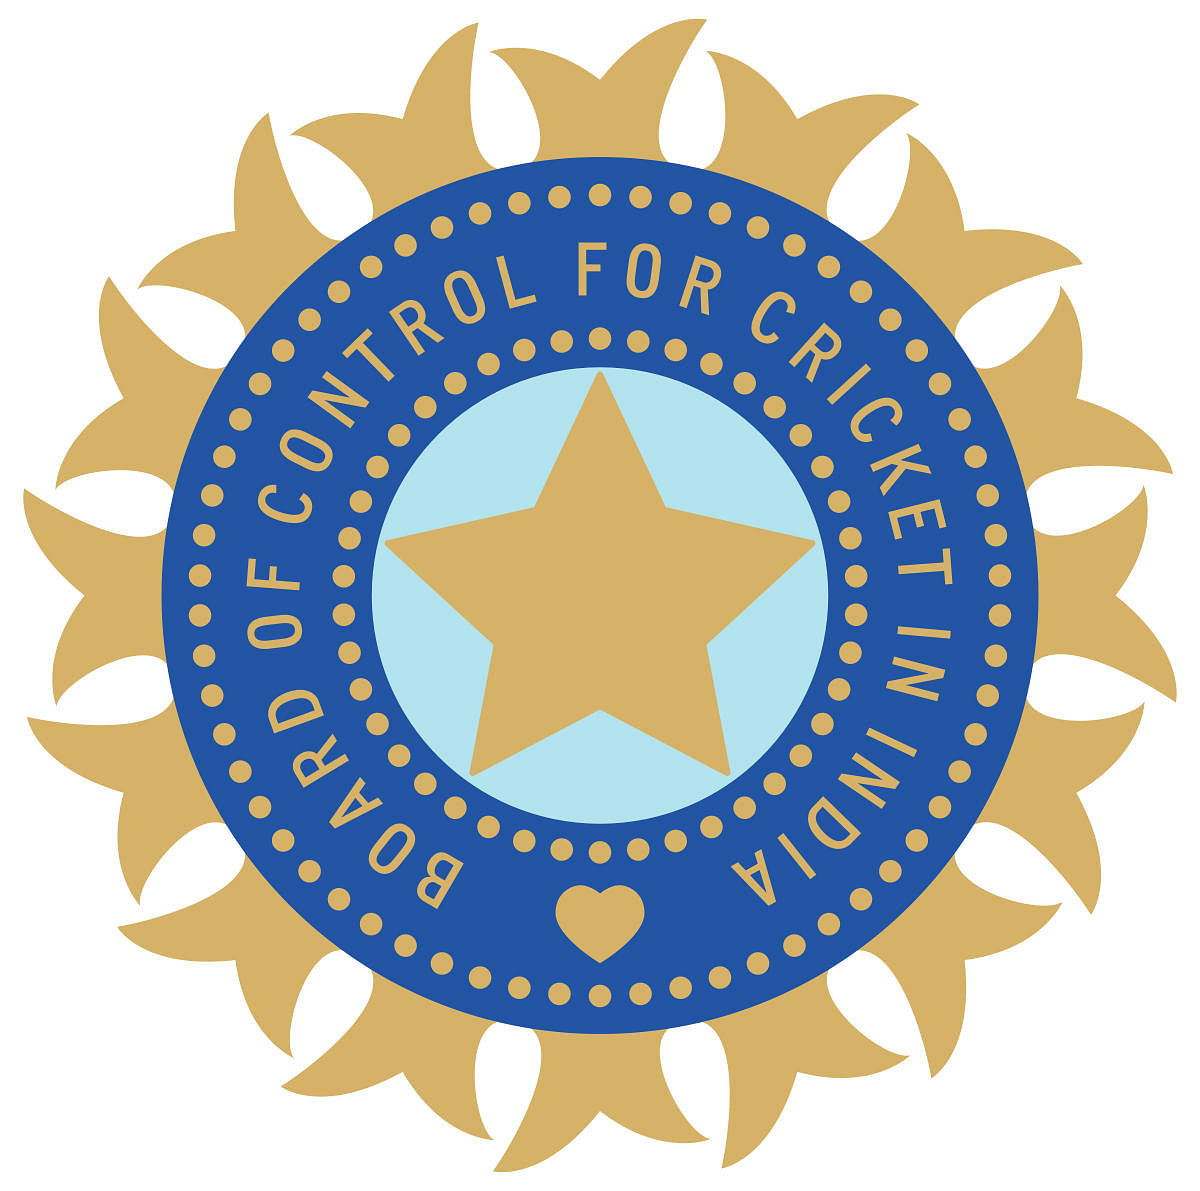 CoA's decision arbitrary and wrong: Former BCCI lawyer